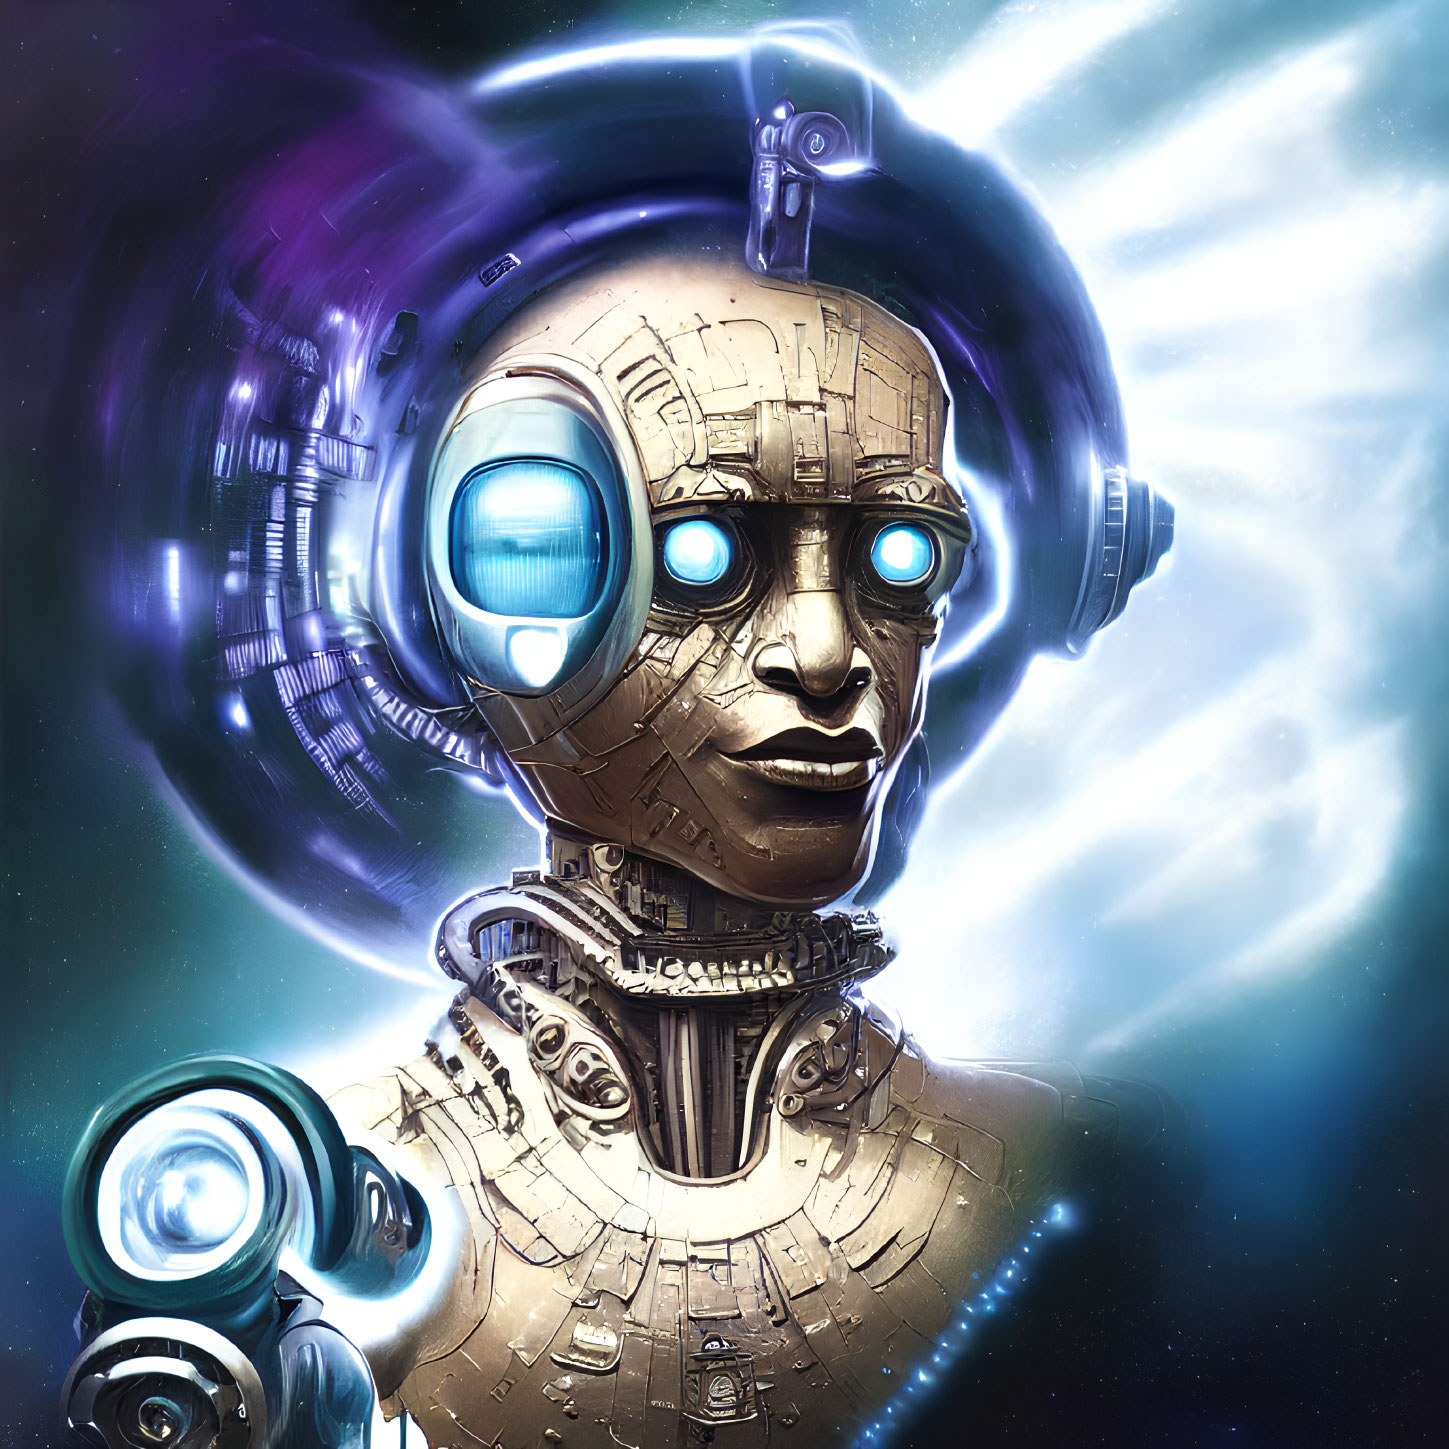 Detailed futuristic robot with humanoid face and glowing blue eyes in cosmic setting